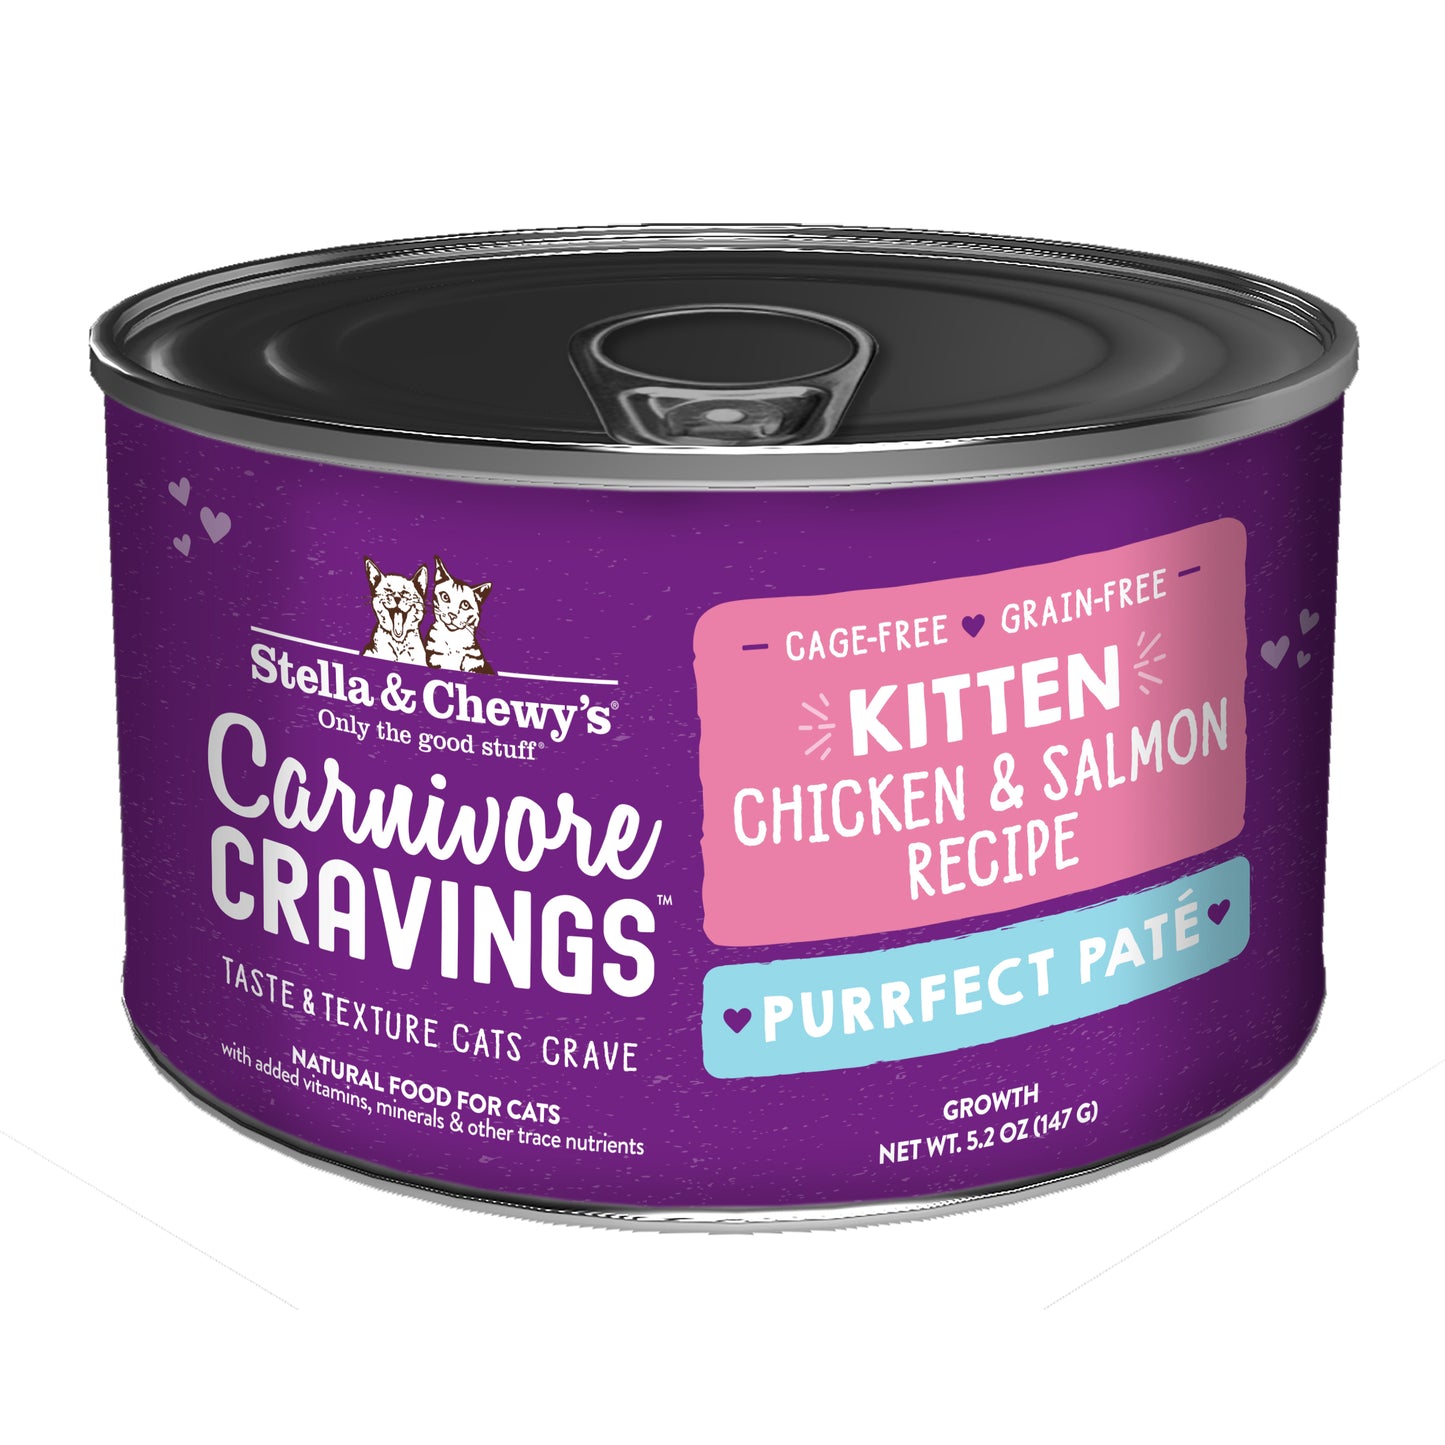 Stella and Chewy's Carnivore Cravings Purrfect Pate Kitten - Chicken & Salmon Recipe 5.2oz